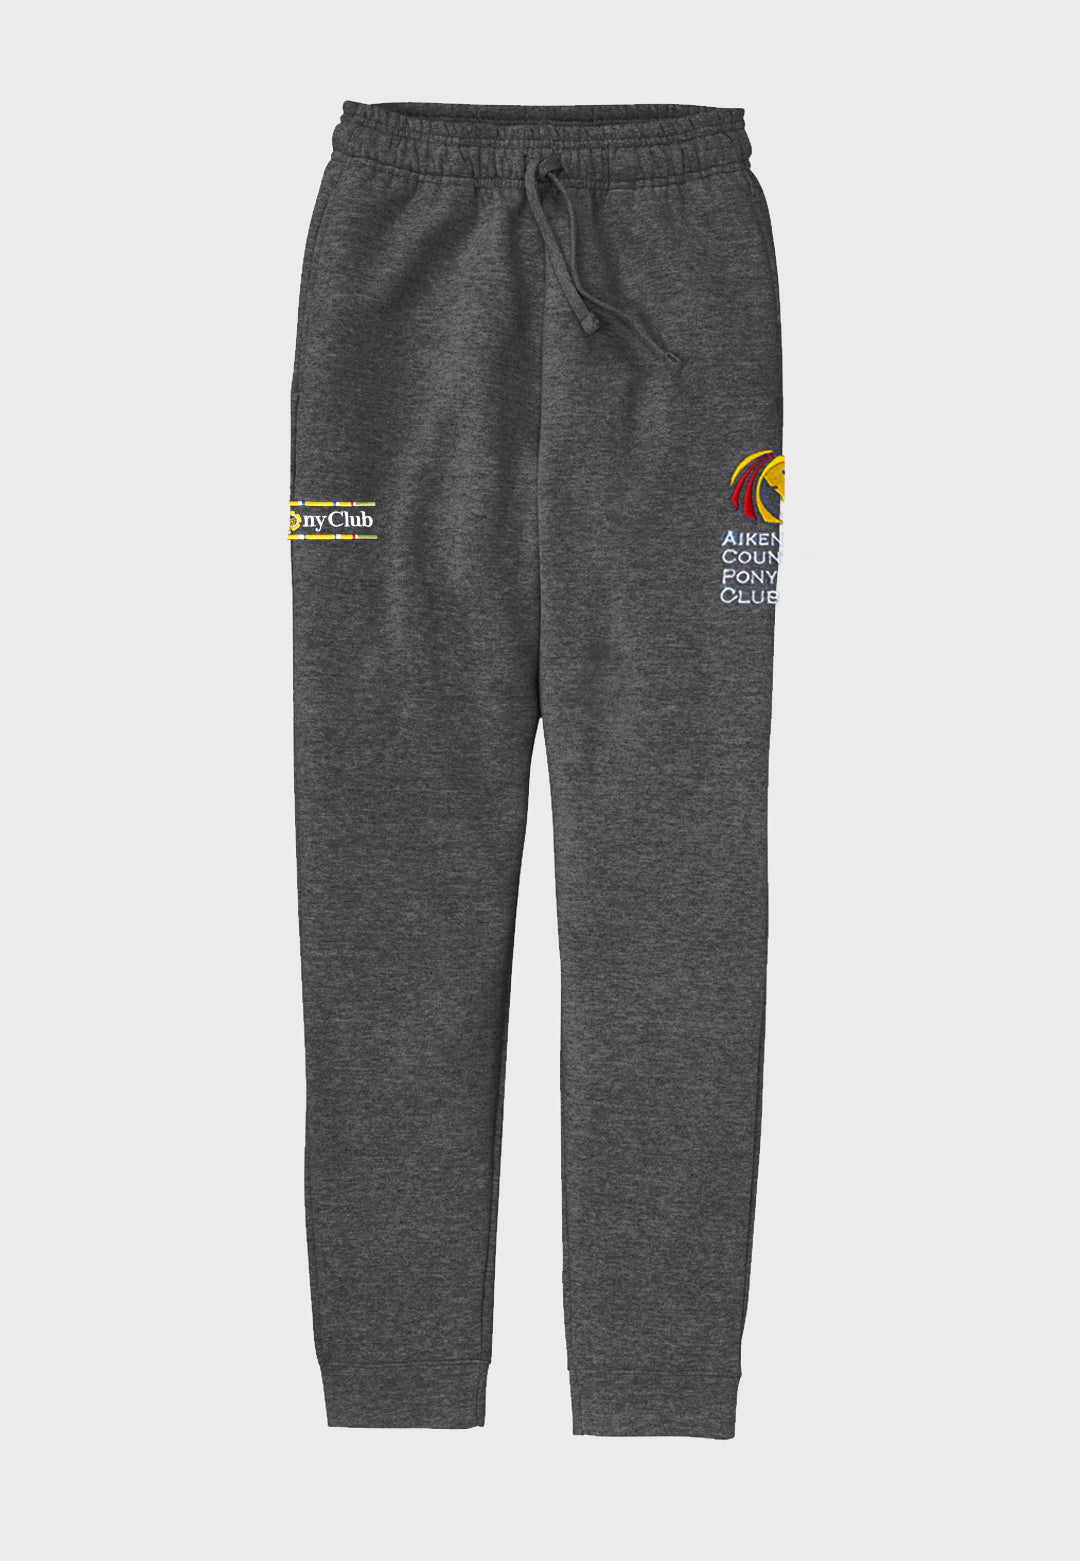 Aiken County Pony Club Port & Company ® Core Fleece Jogger - Unisex Adult + Youth Sizes, 2 Color Options